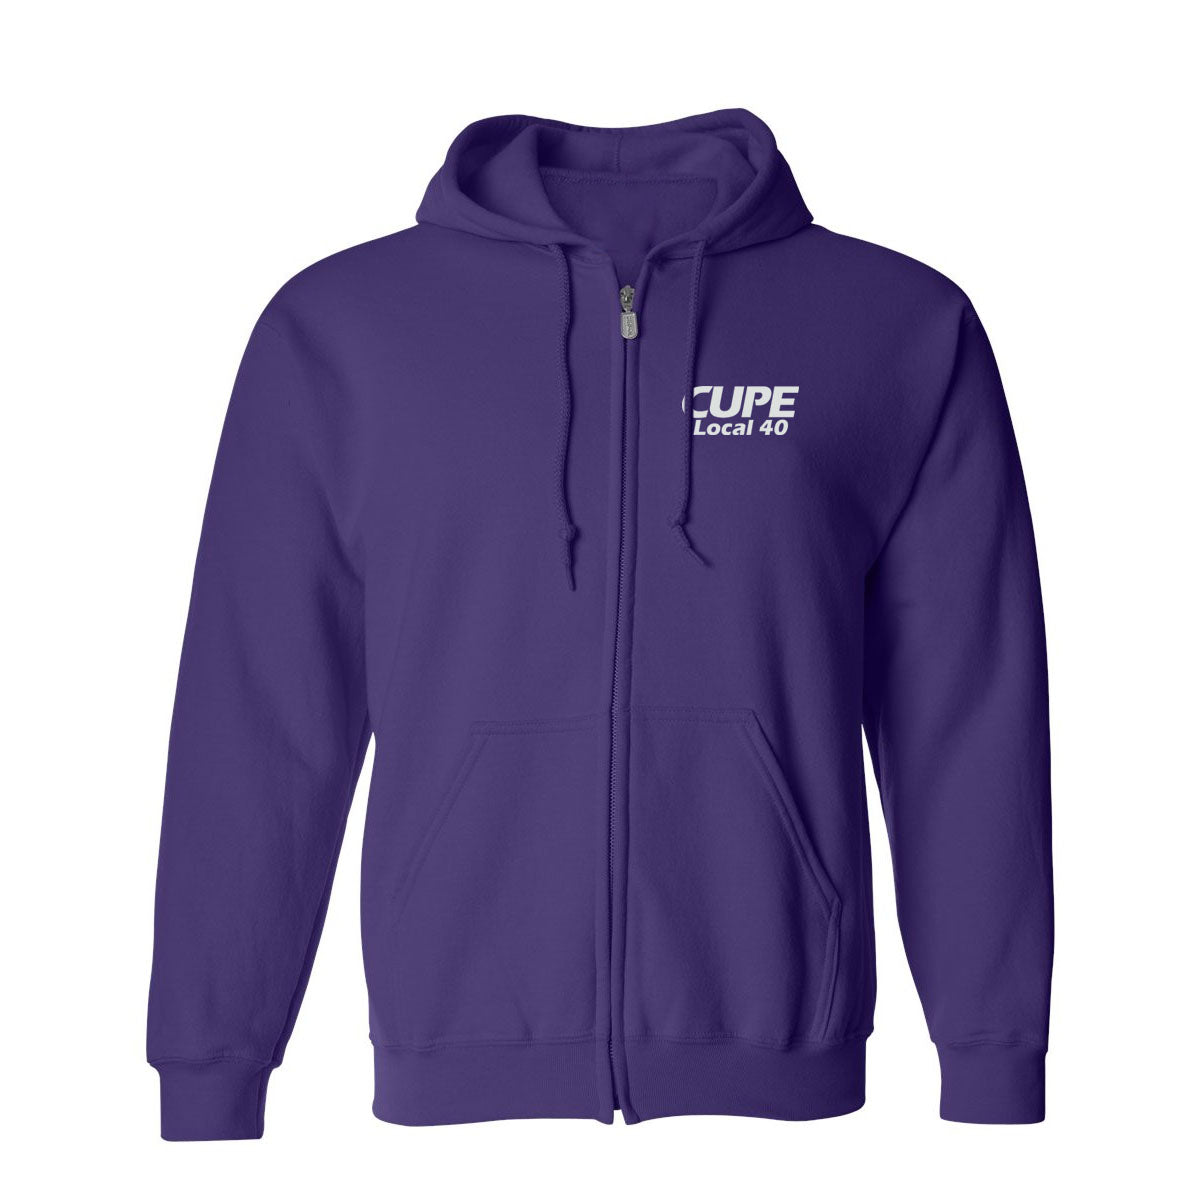 CUPE Local 40 - Purple Zip Up Hoodie